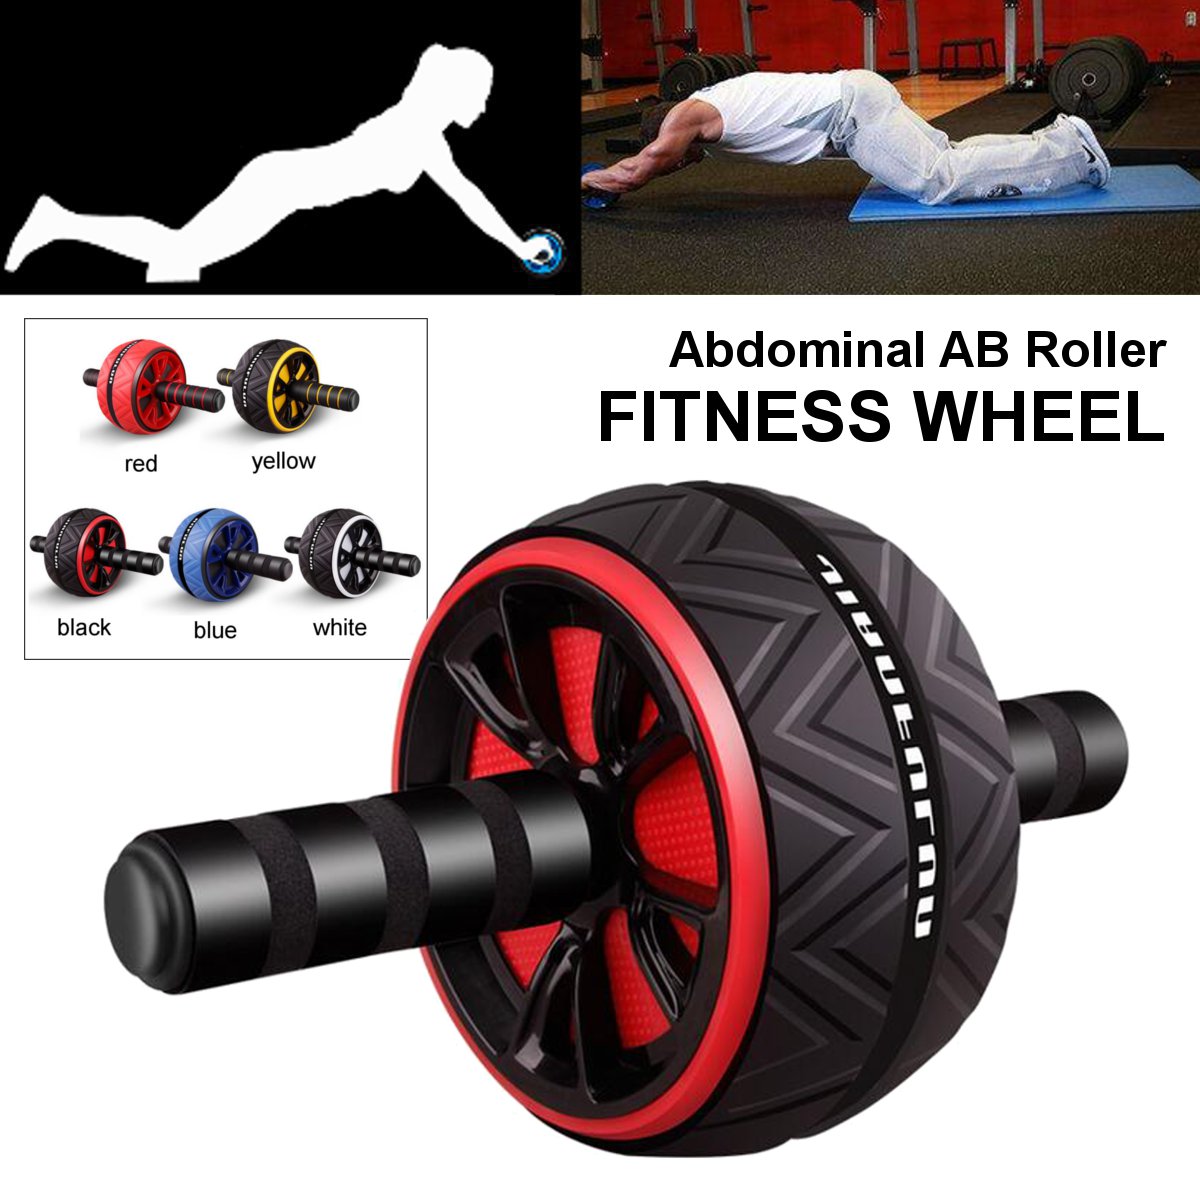 Single-Abdominal-Wheel-Roller-Home-Gym-Arm-Waist-Strength-Training-Fitness-Exercise-Tools-1663886-1